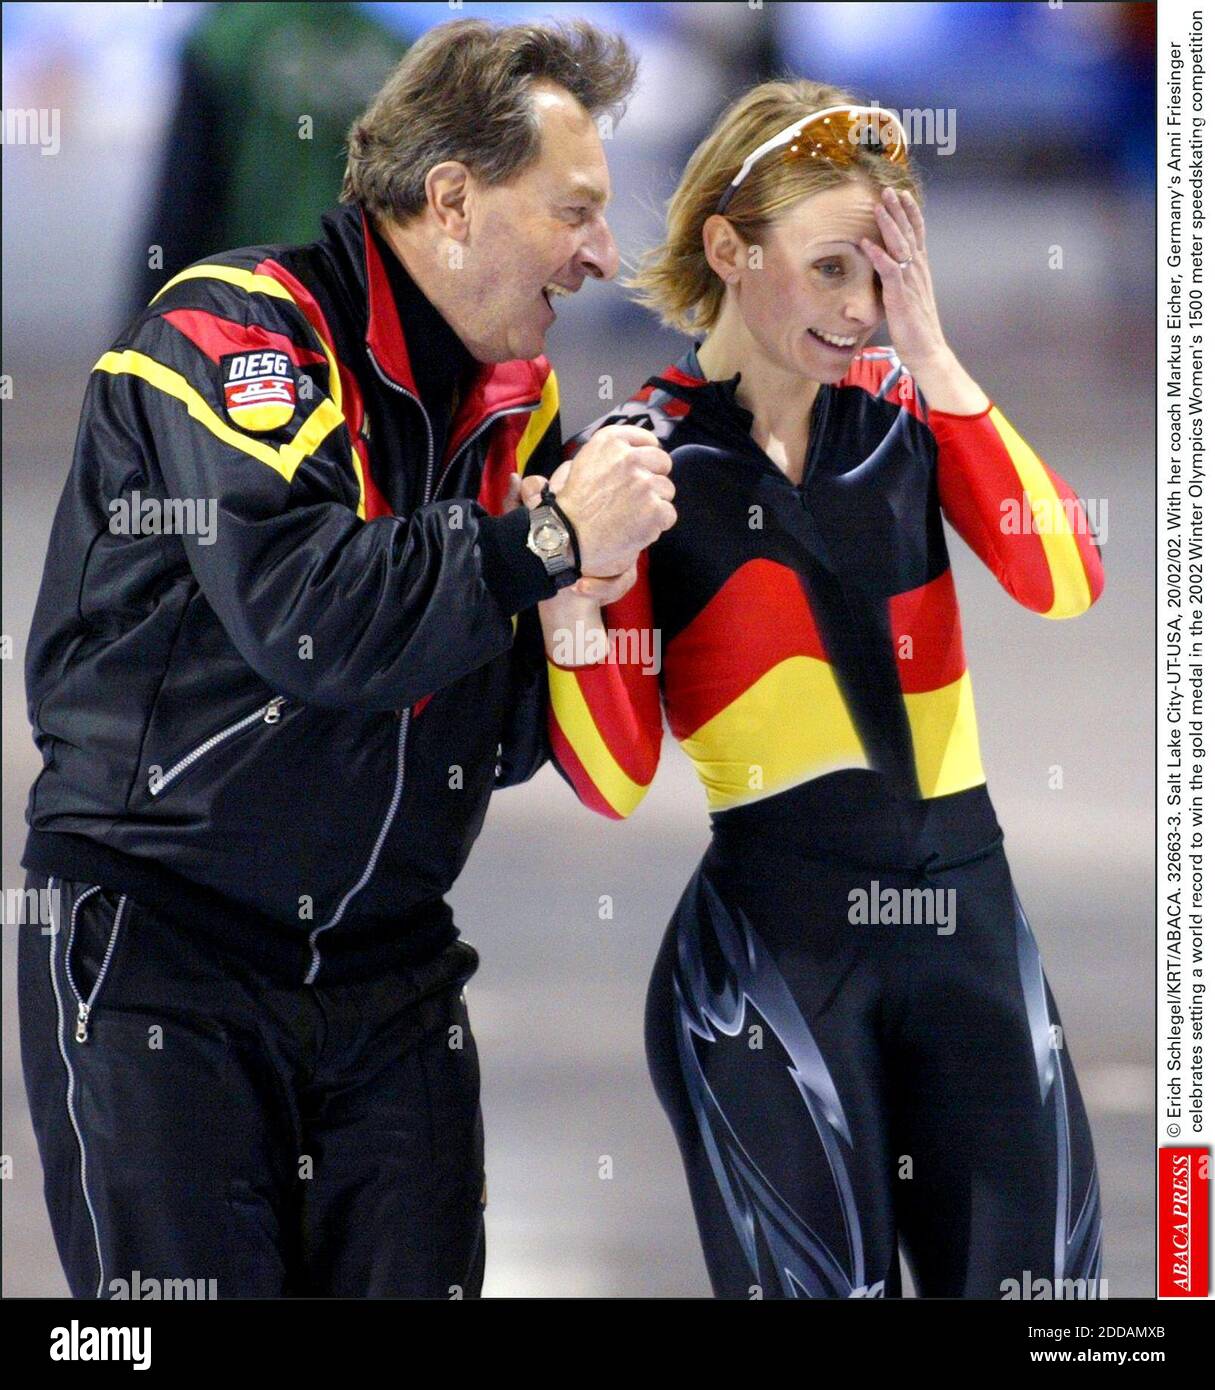 NO FILM, NO VIDEO, NO TV, NO DOCUMENTARY - © Erich Schlegel/KRT/ABACA. 32663-3. Salt Lake City-UT-USA, 20/02/02. With her coach Markus Eicher, Germany's Anni Friesinger celebrates setting a world record to win the gold medal in the 2002 Winter Olympics Women's 1500 meter speedskating competition Stock Photo